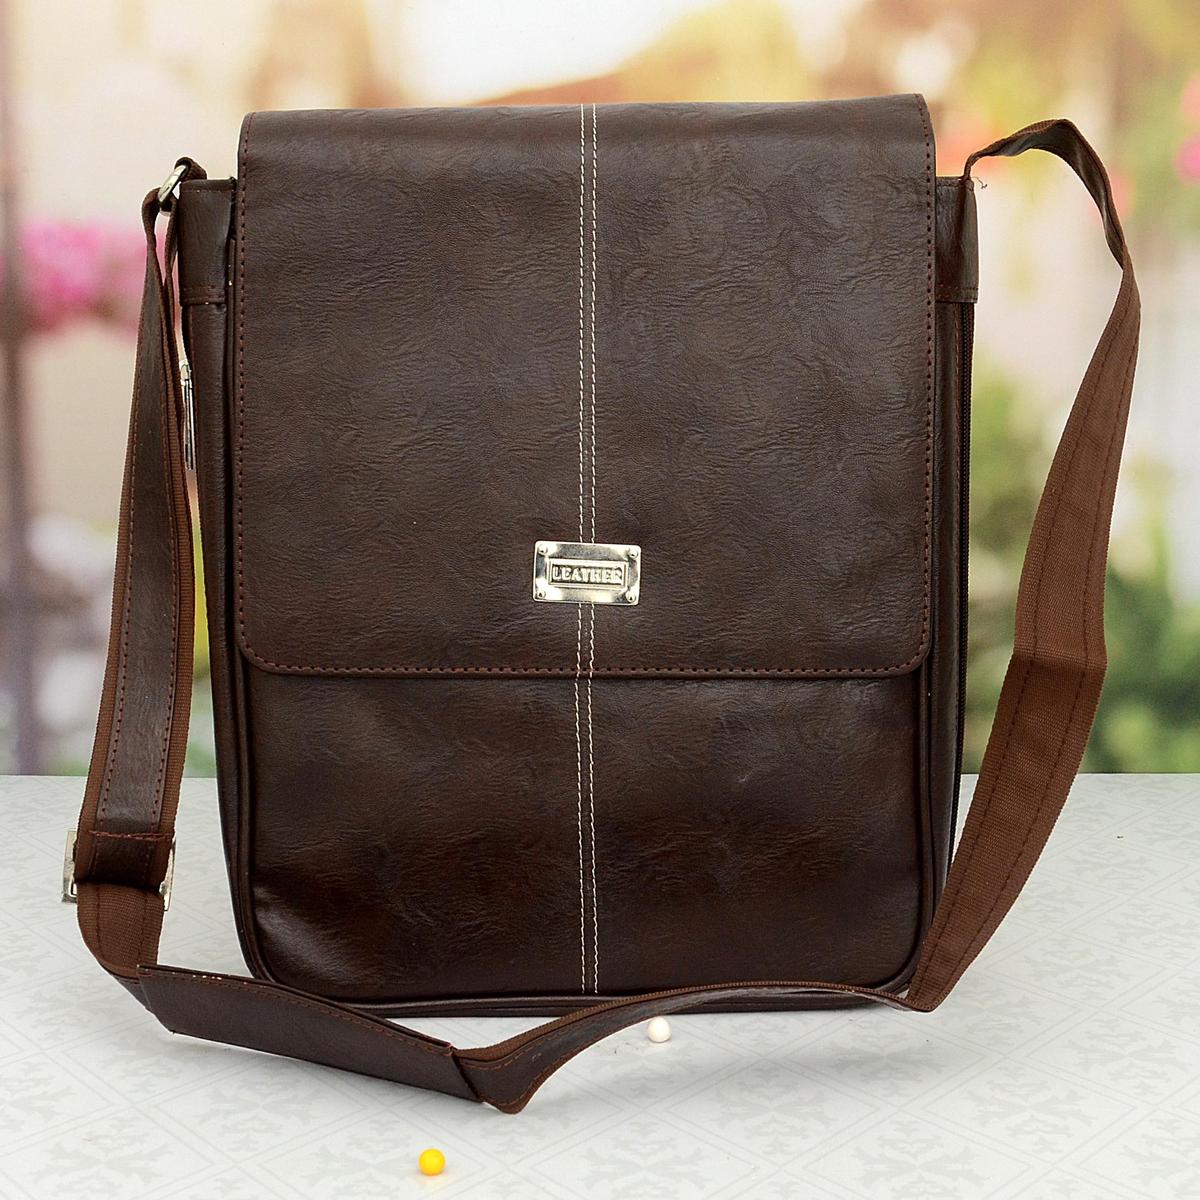 Sling Brown Bag, Bags and Backpacks for Him